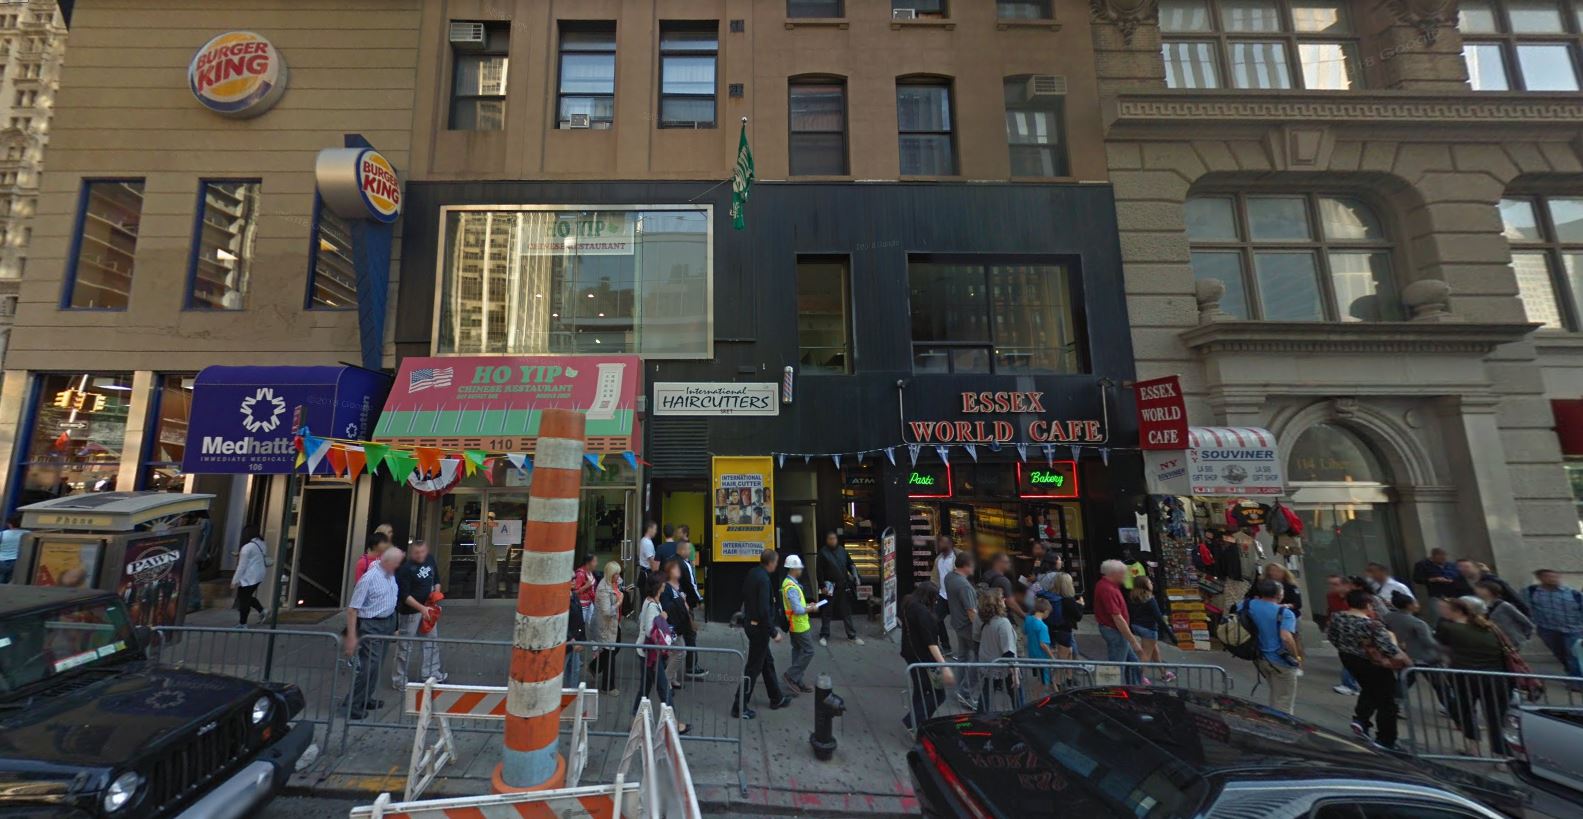 Permits Filed For 30 Story Hotel At 112 Liberty Street In The